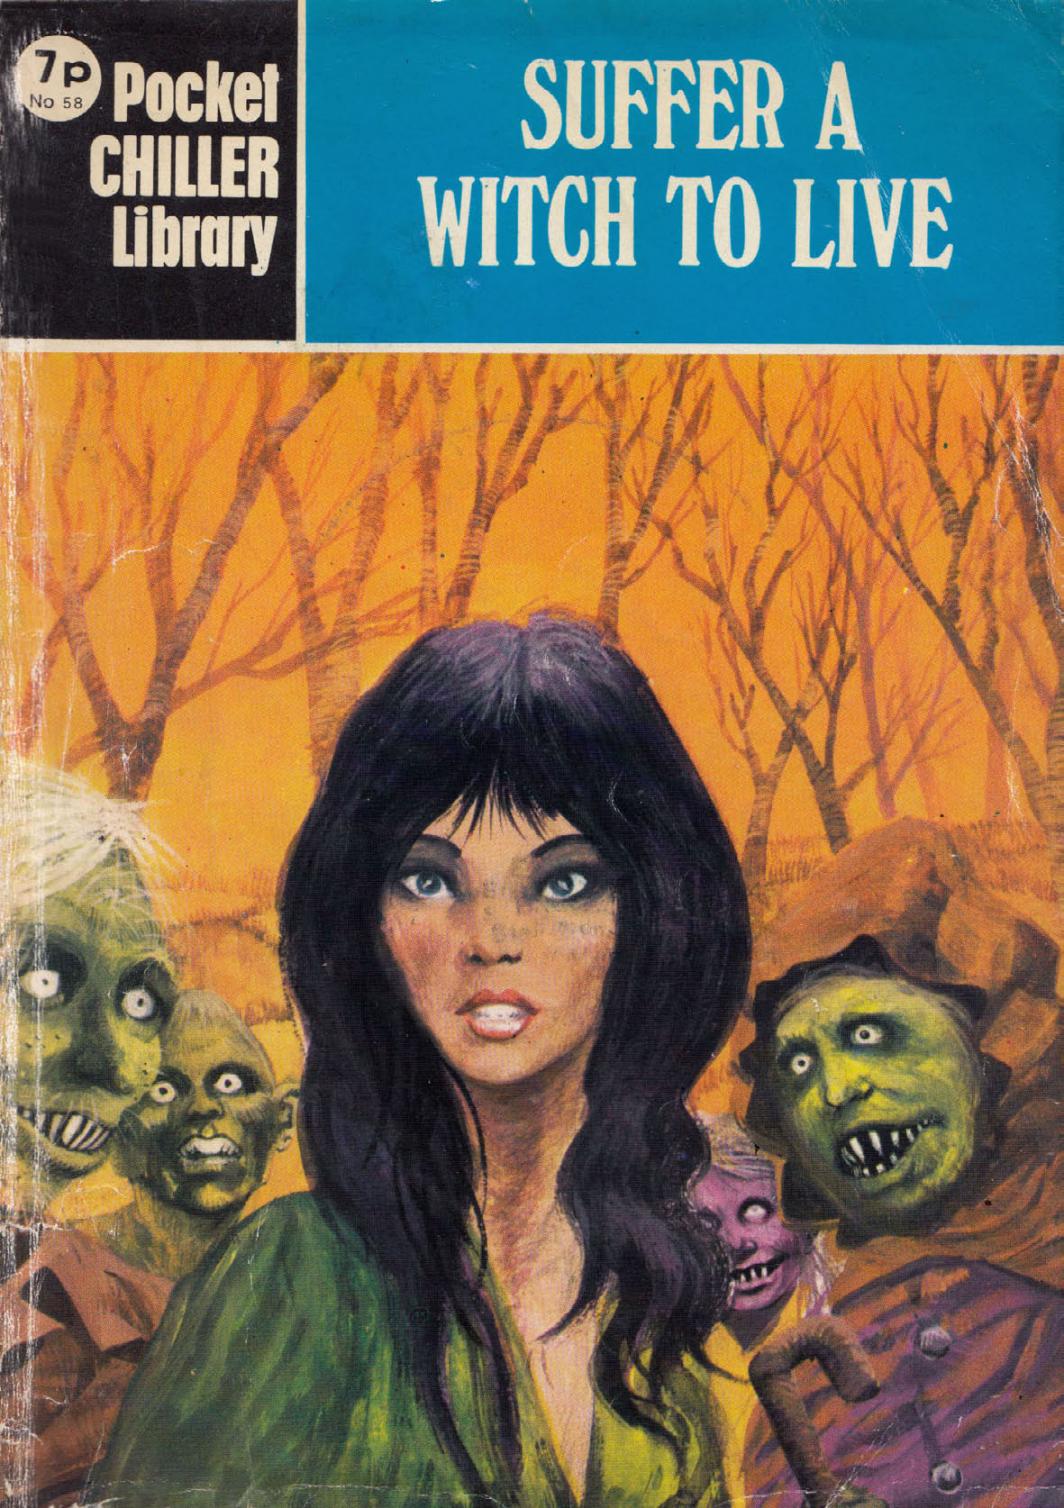 Pocket Chiller Library 58 - Suffer a Witch to Live